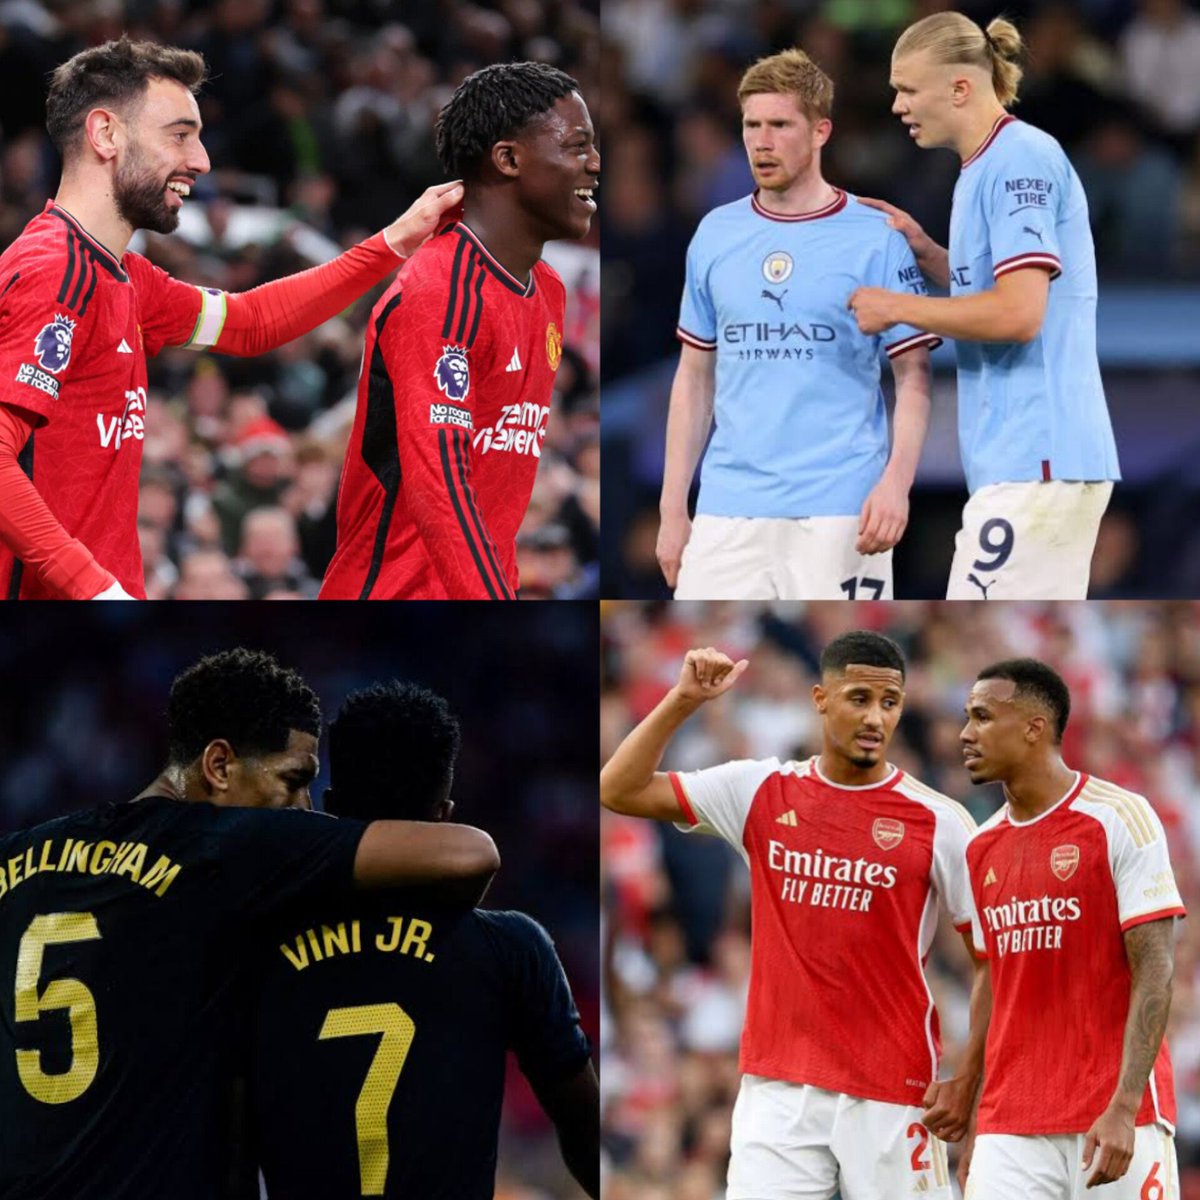 These duos has been outstanding this season but, which of them is the best?